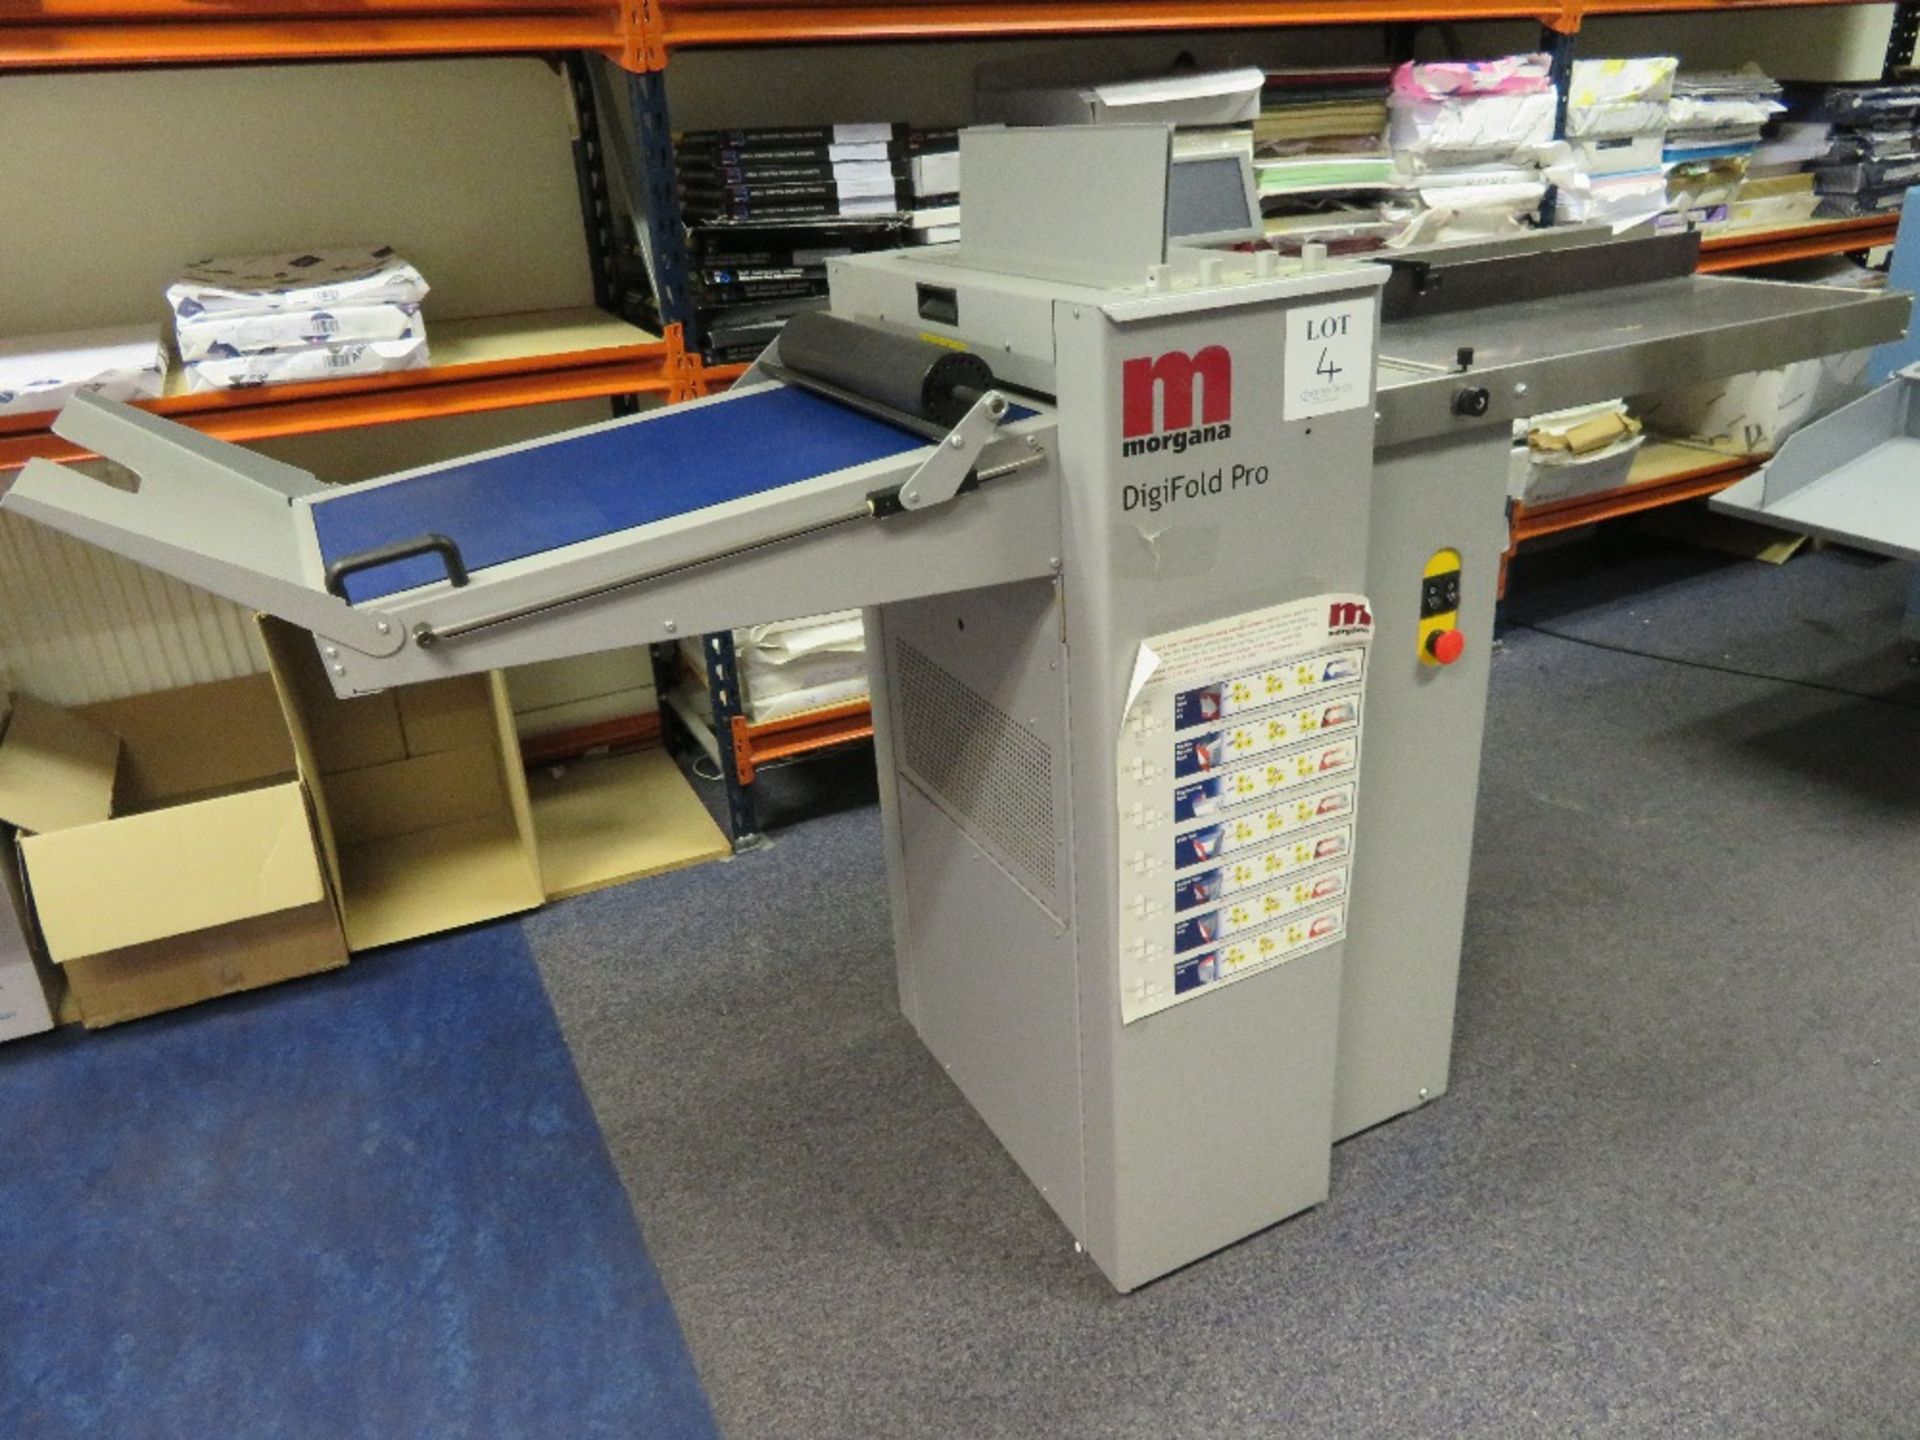 Morgana Model Digifold Pro 1708203S (CB) Creasing and Folding Machine, Serial No. 600895 - Image 2 of 6